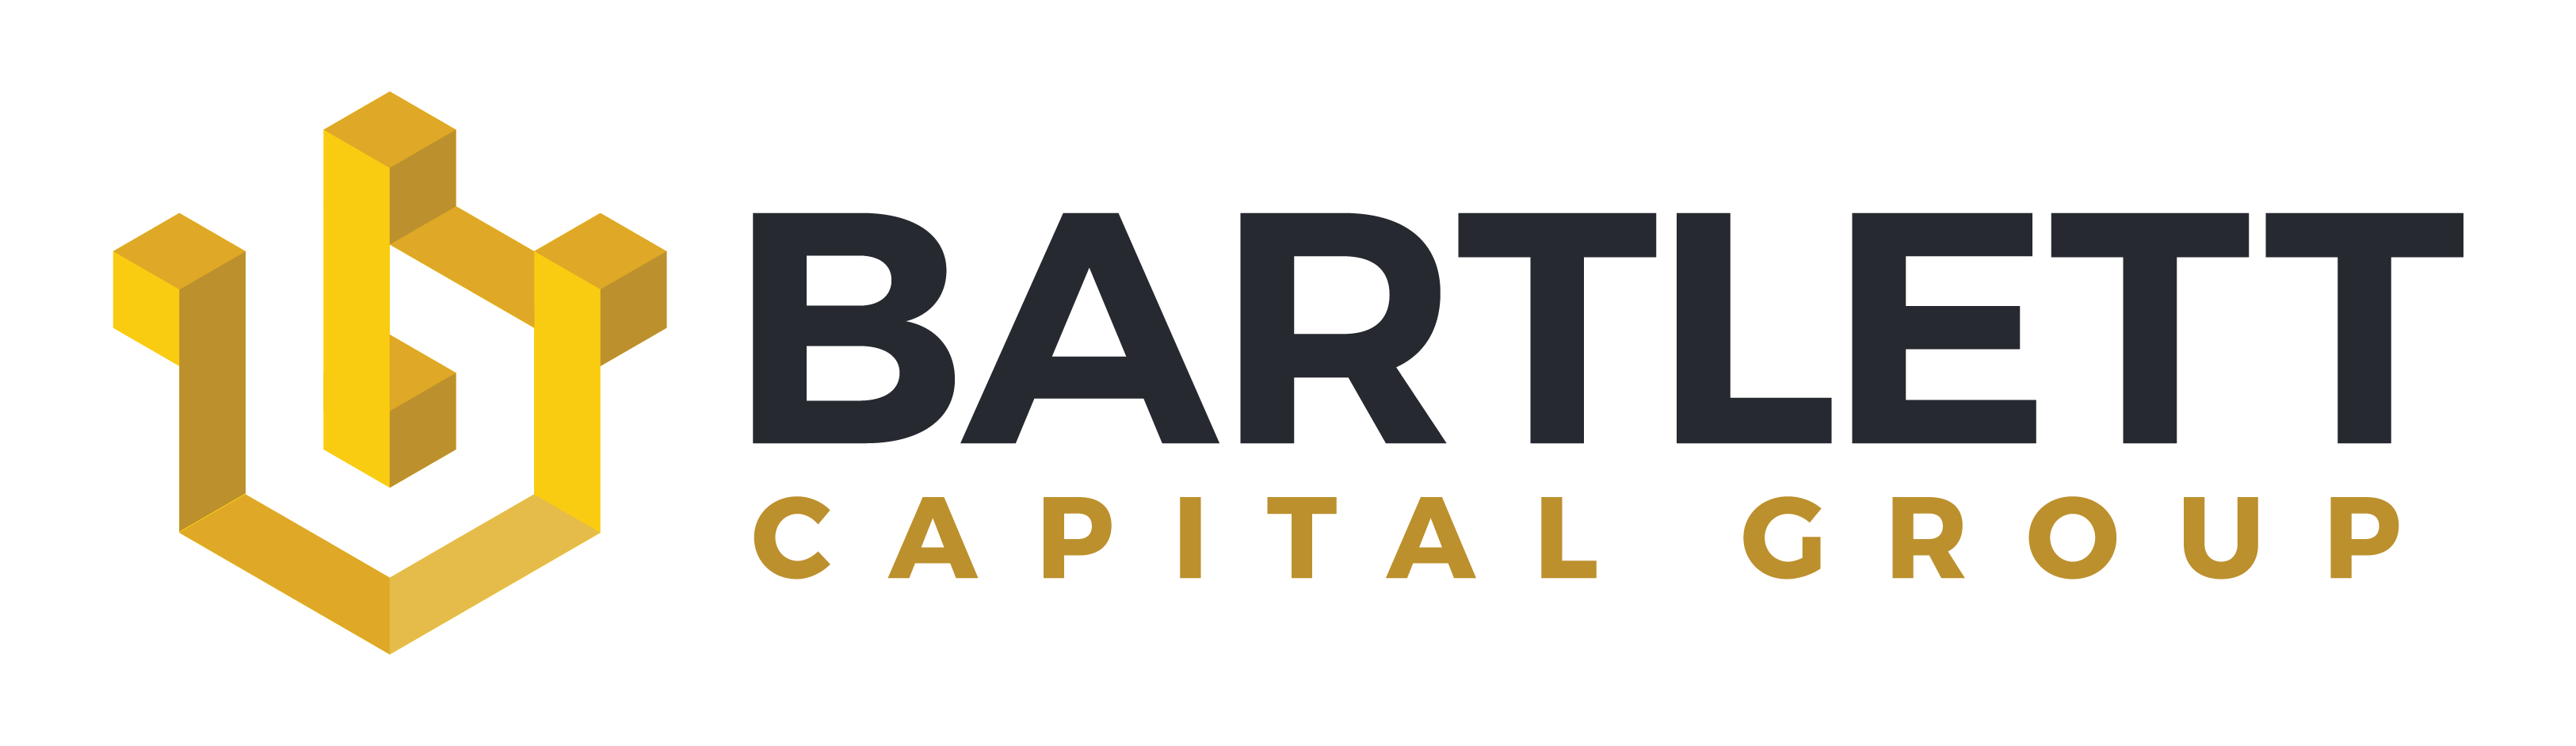 About Us | Bartlett Capital Group